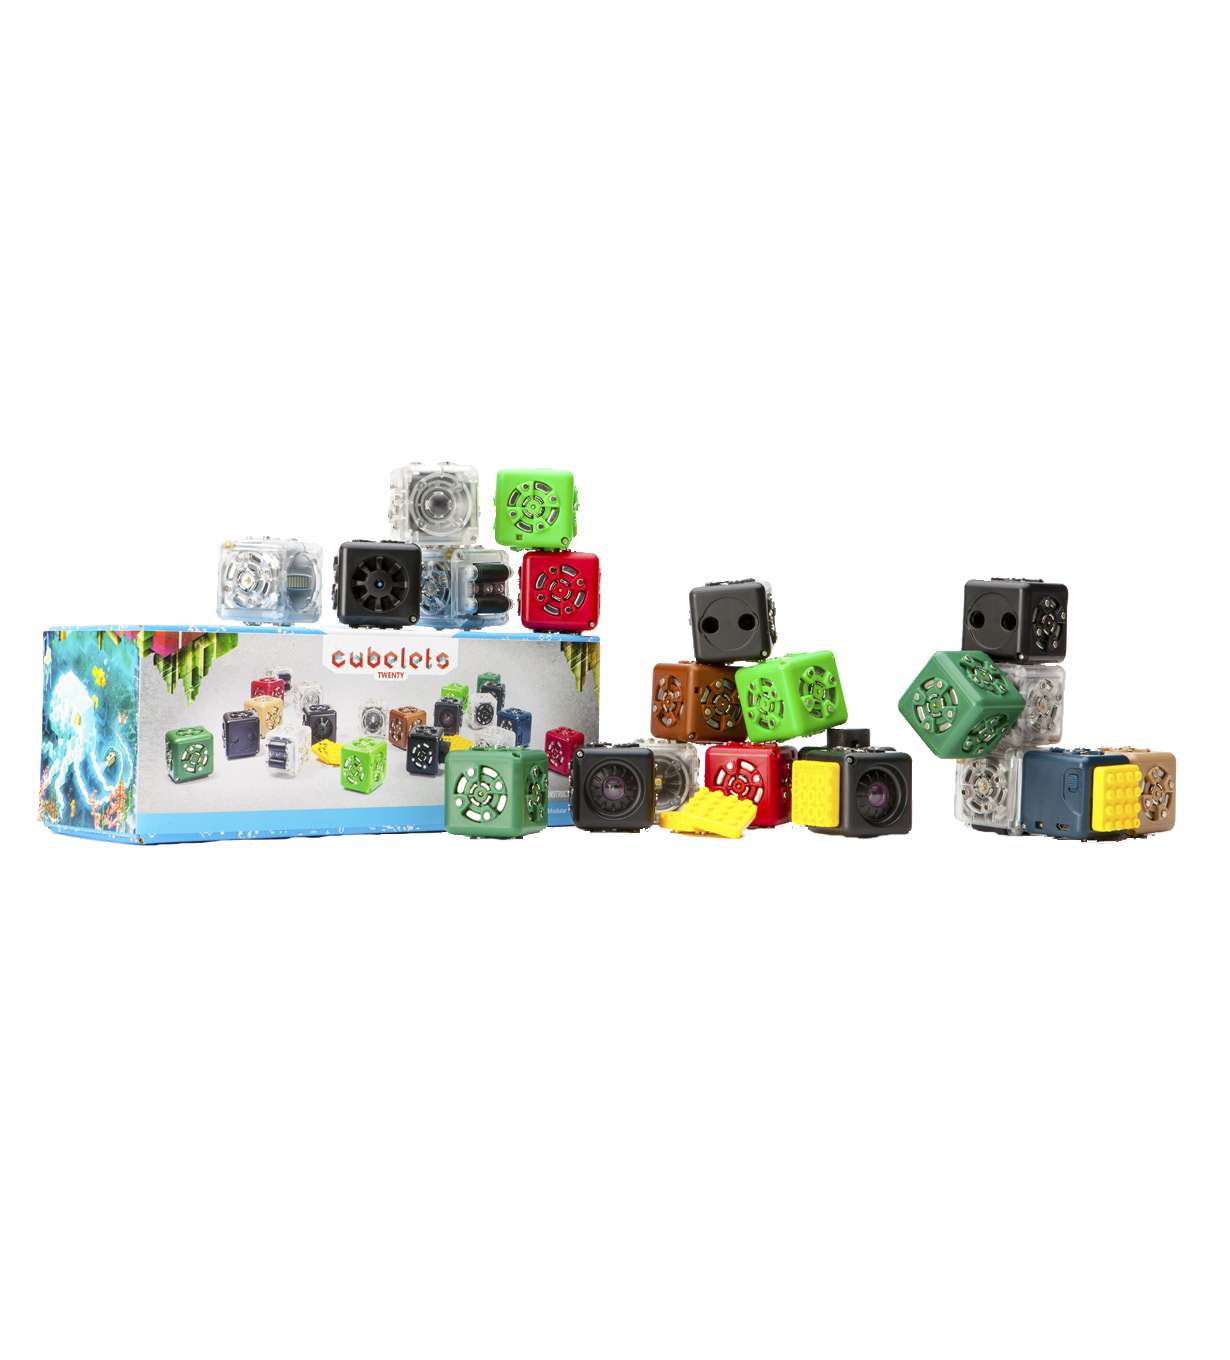 Main picture Cubelets-1.png